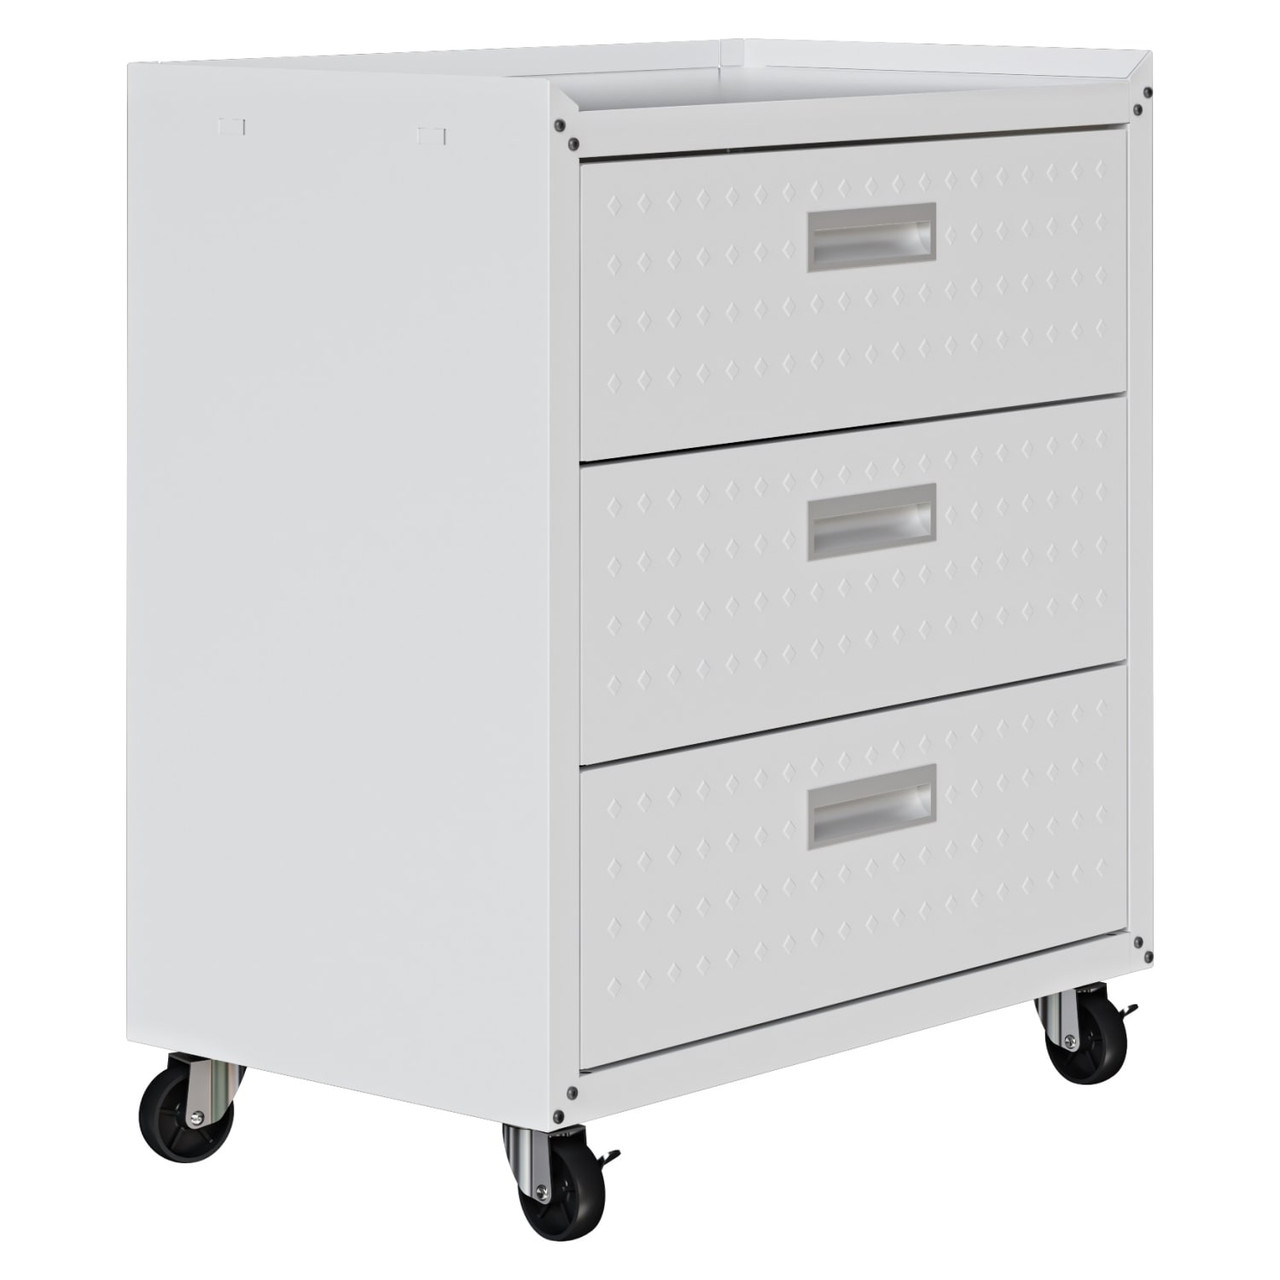 Fortress Textured Metal 31.5” Garage Mobile Chest with 3 Full Extension Drawers in White